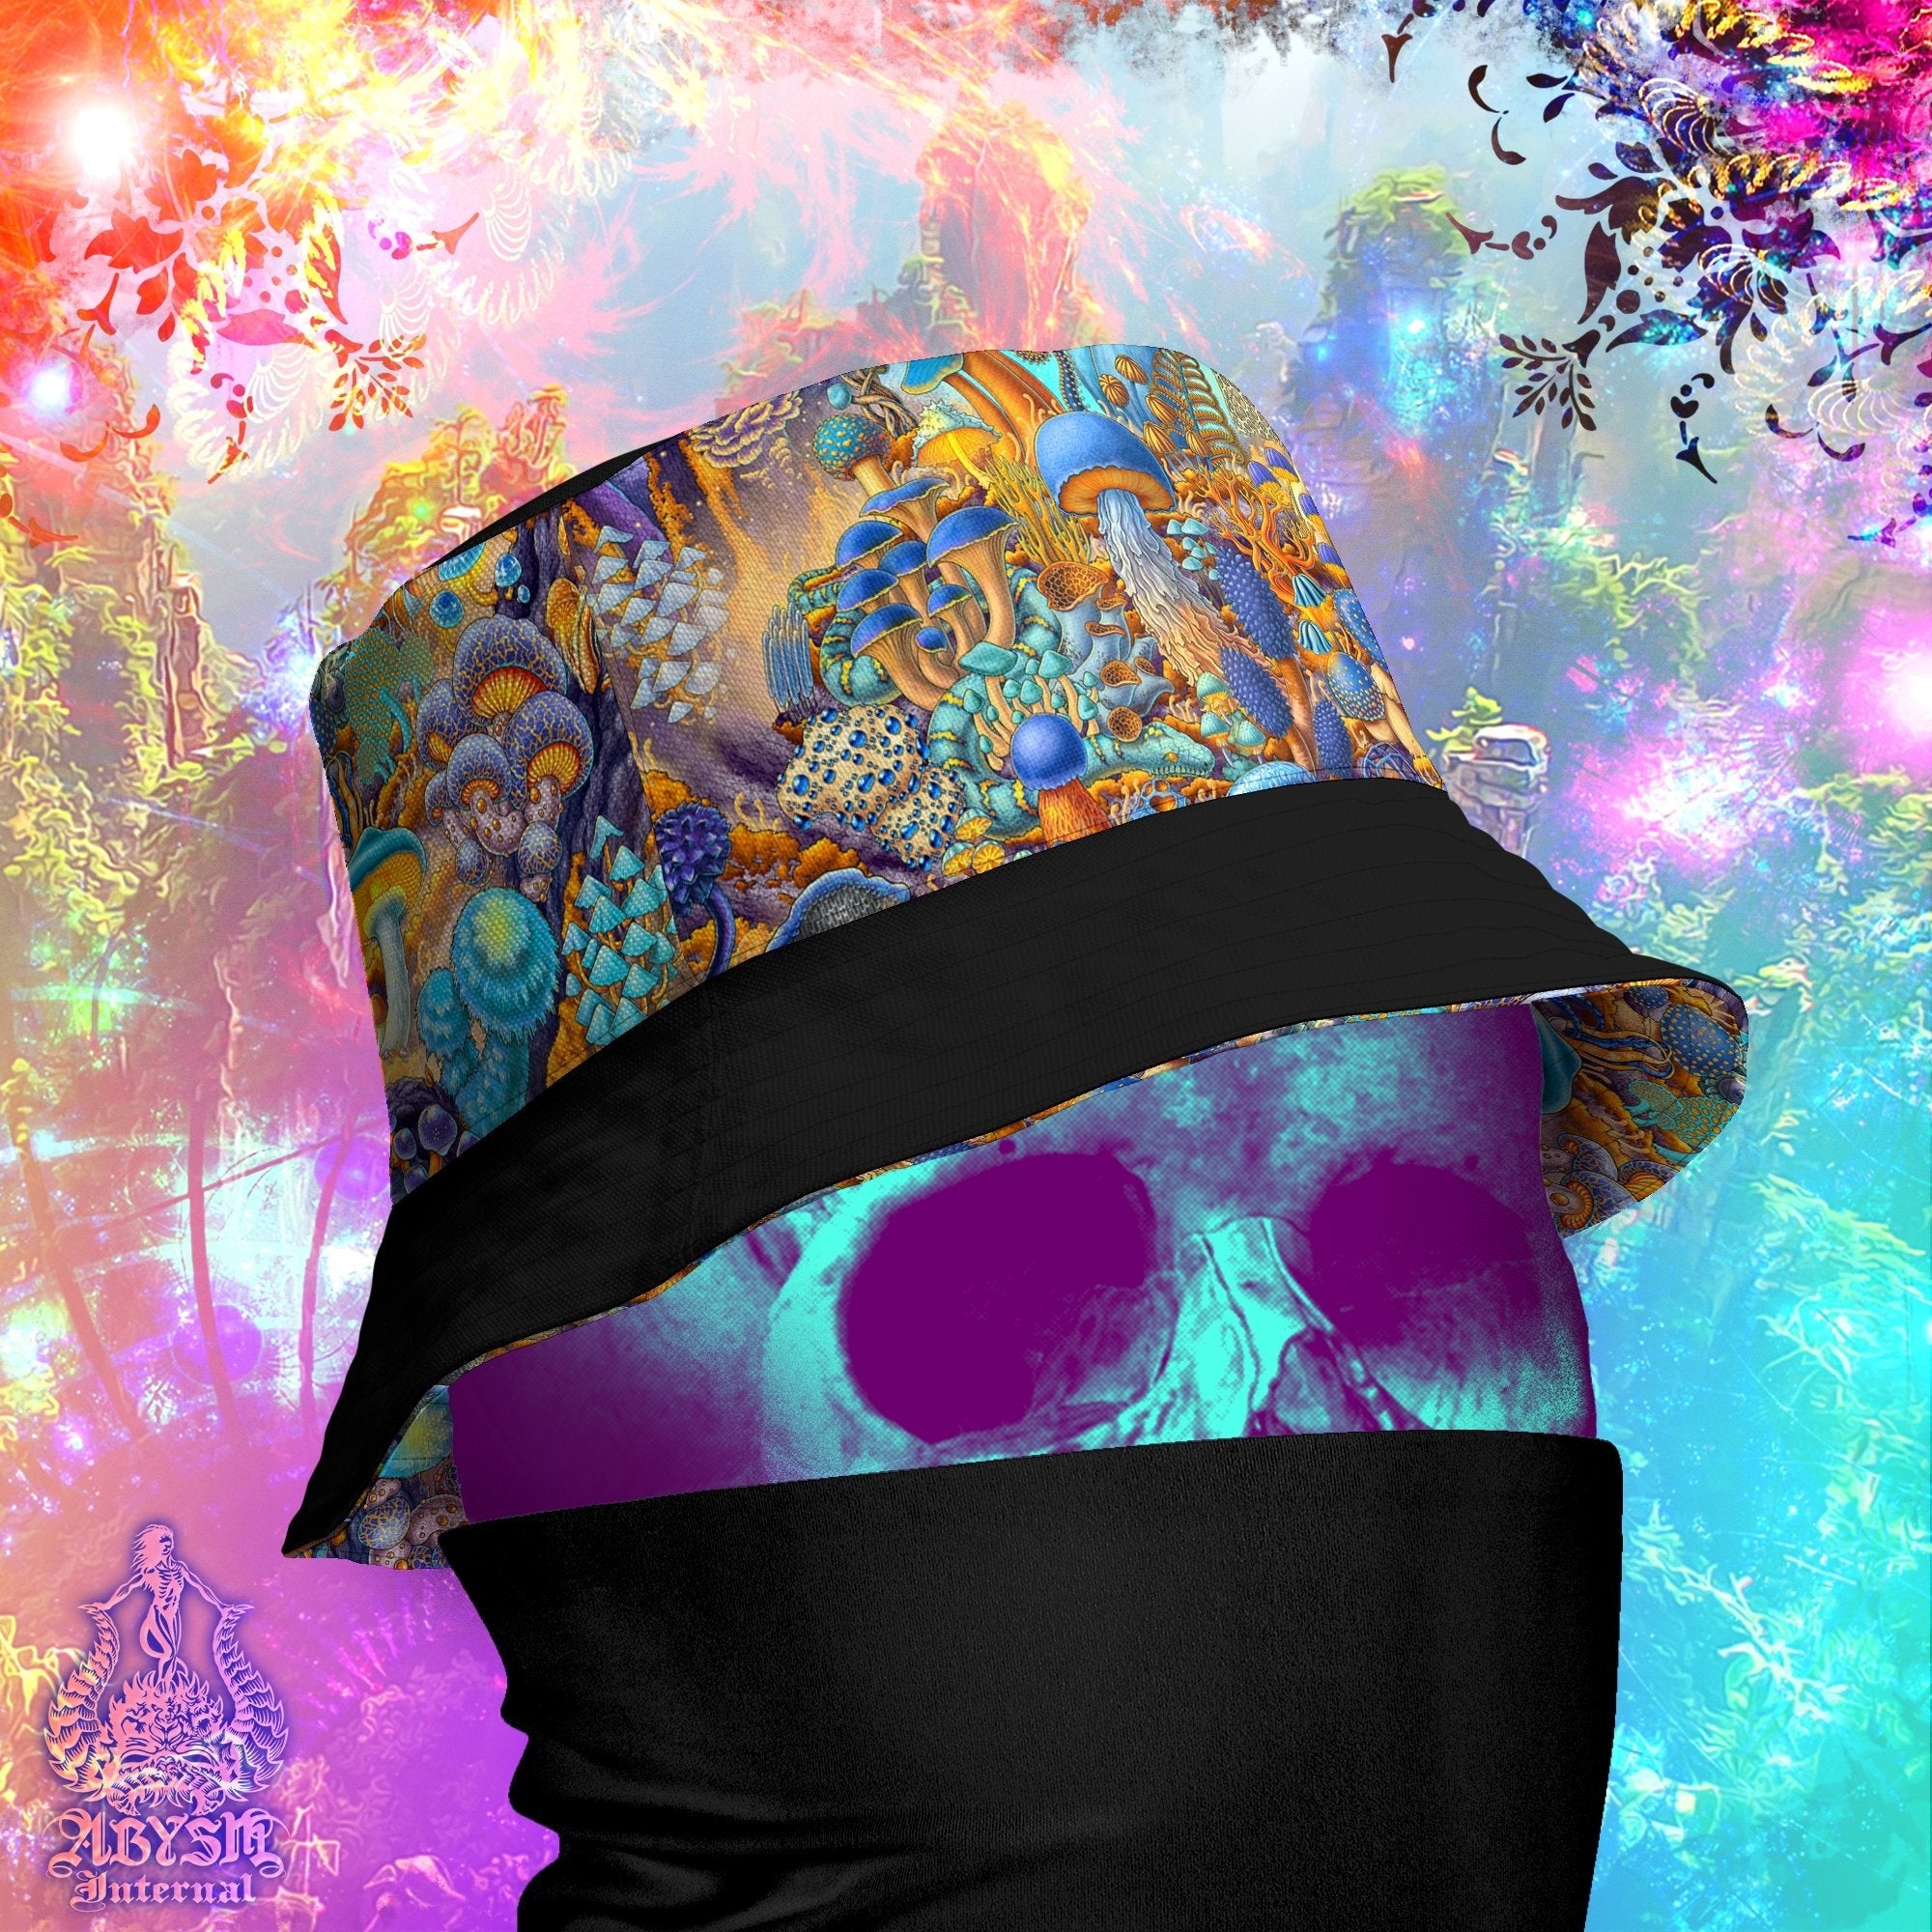 Mushrooms Bucket Hat, Psychedelic Streetwear, Magic Shrooms Summer Hat, Indie Beach Accessory with Linen feel, Reversible & Unisex - Colorful - Abysm Internal